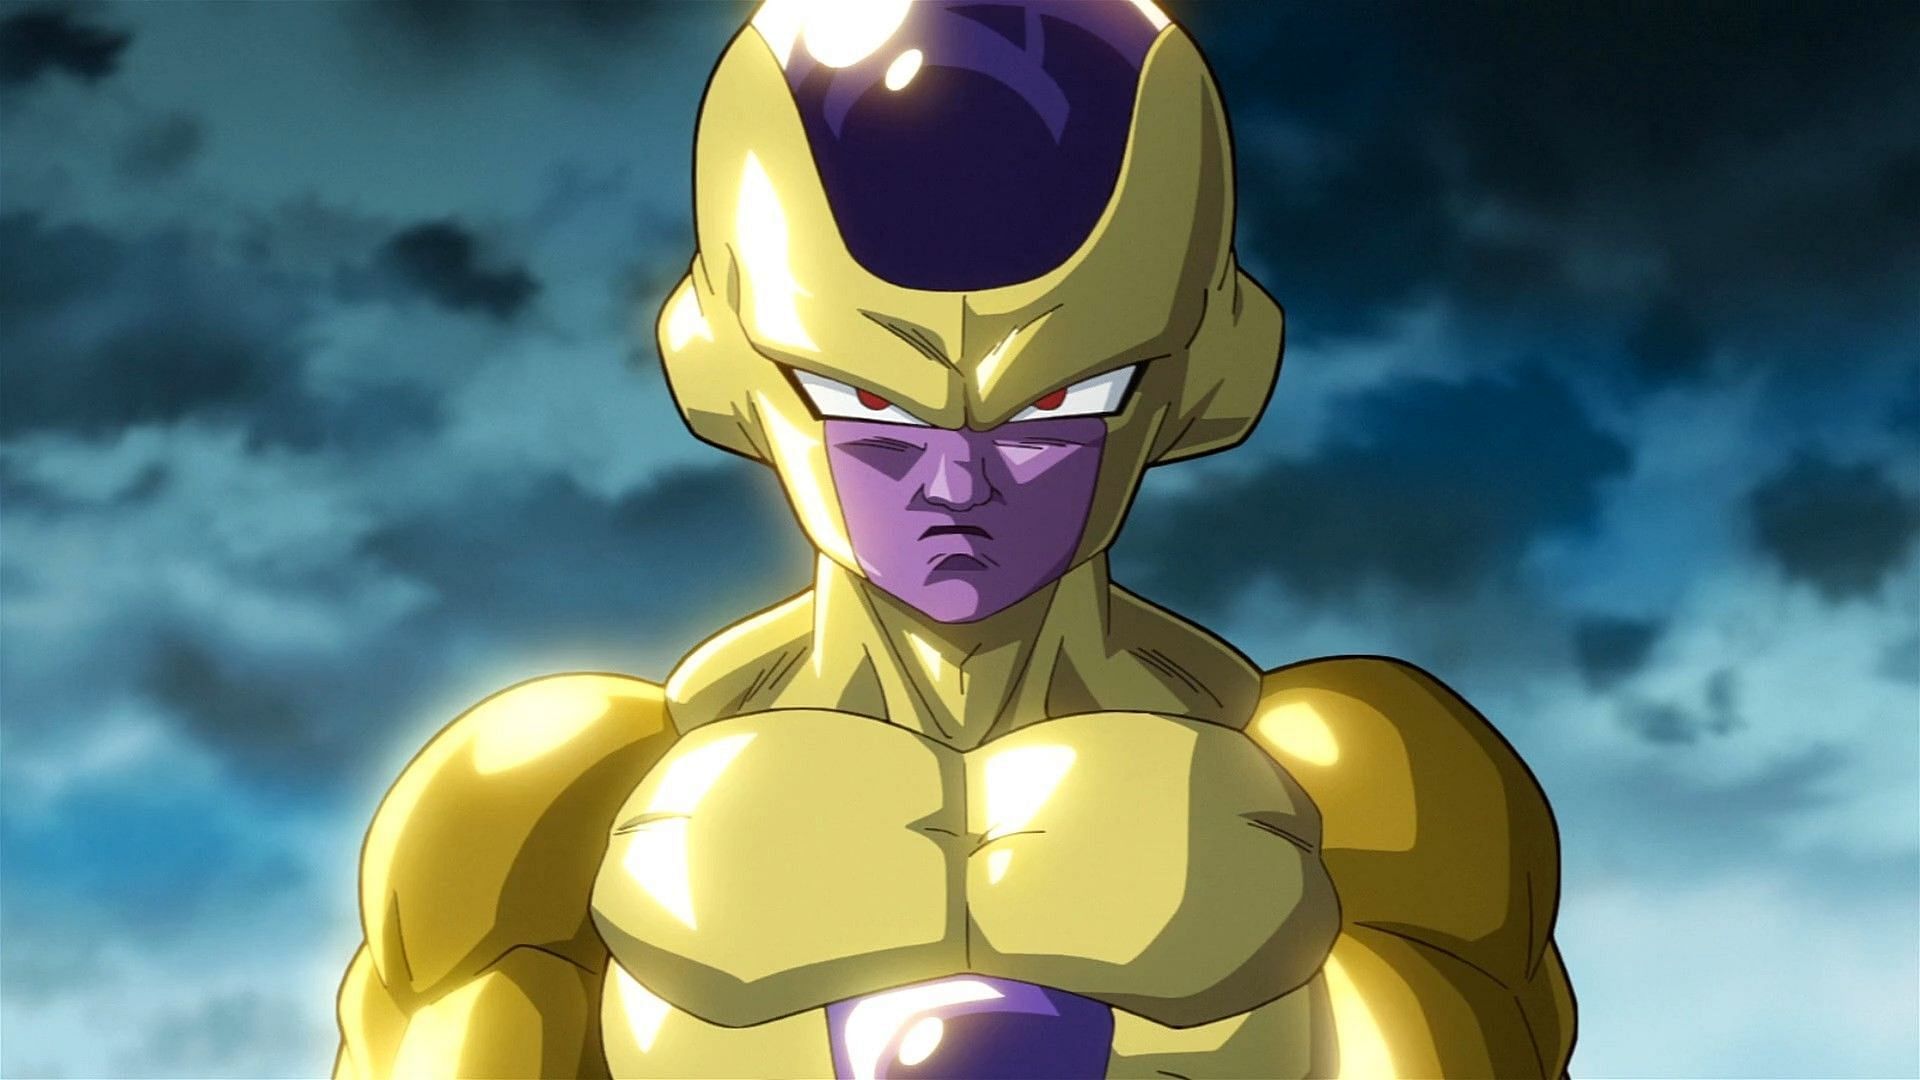 Golden Frieza as he appears in Dragon Ball Super (Image via Toei Animation)